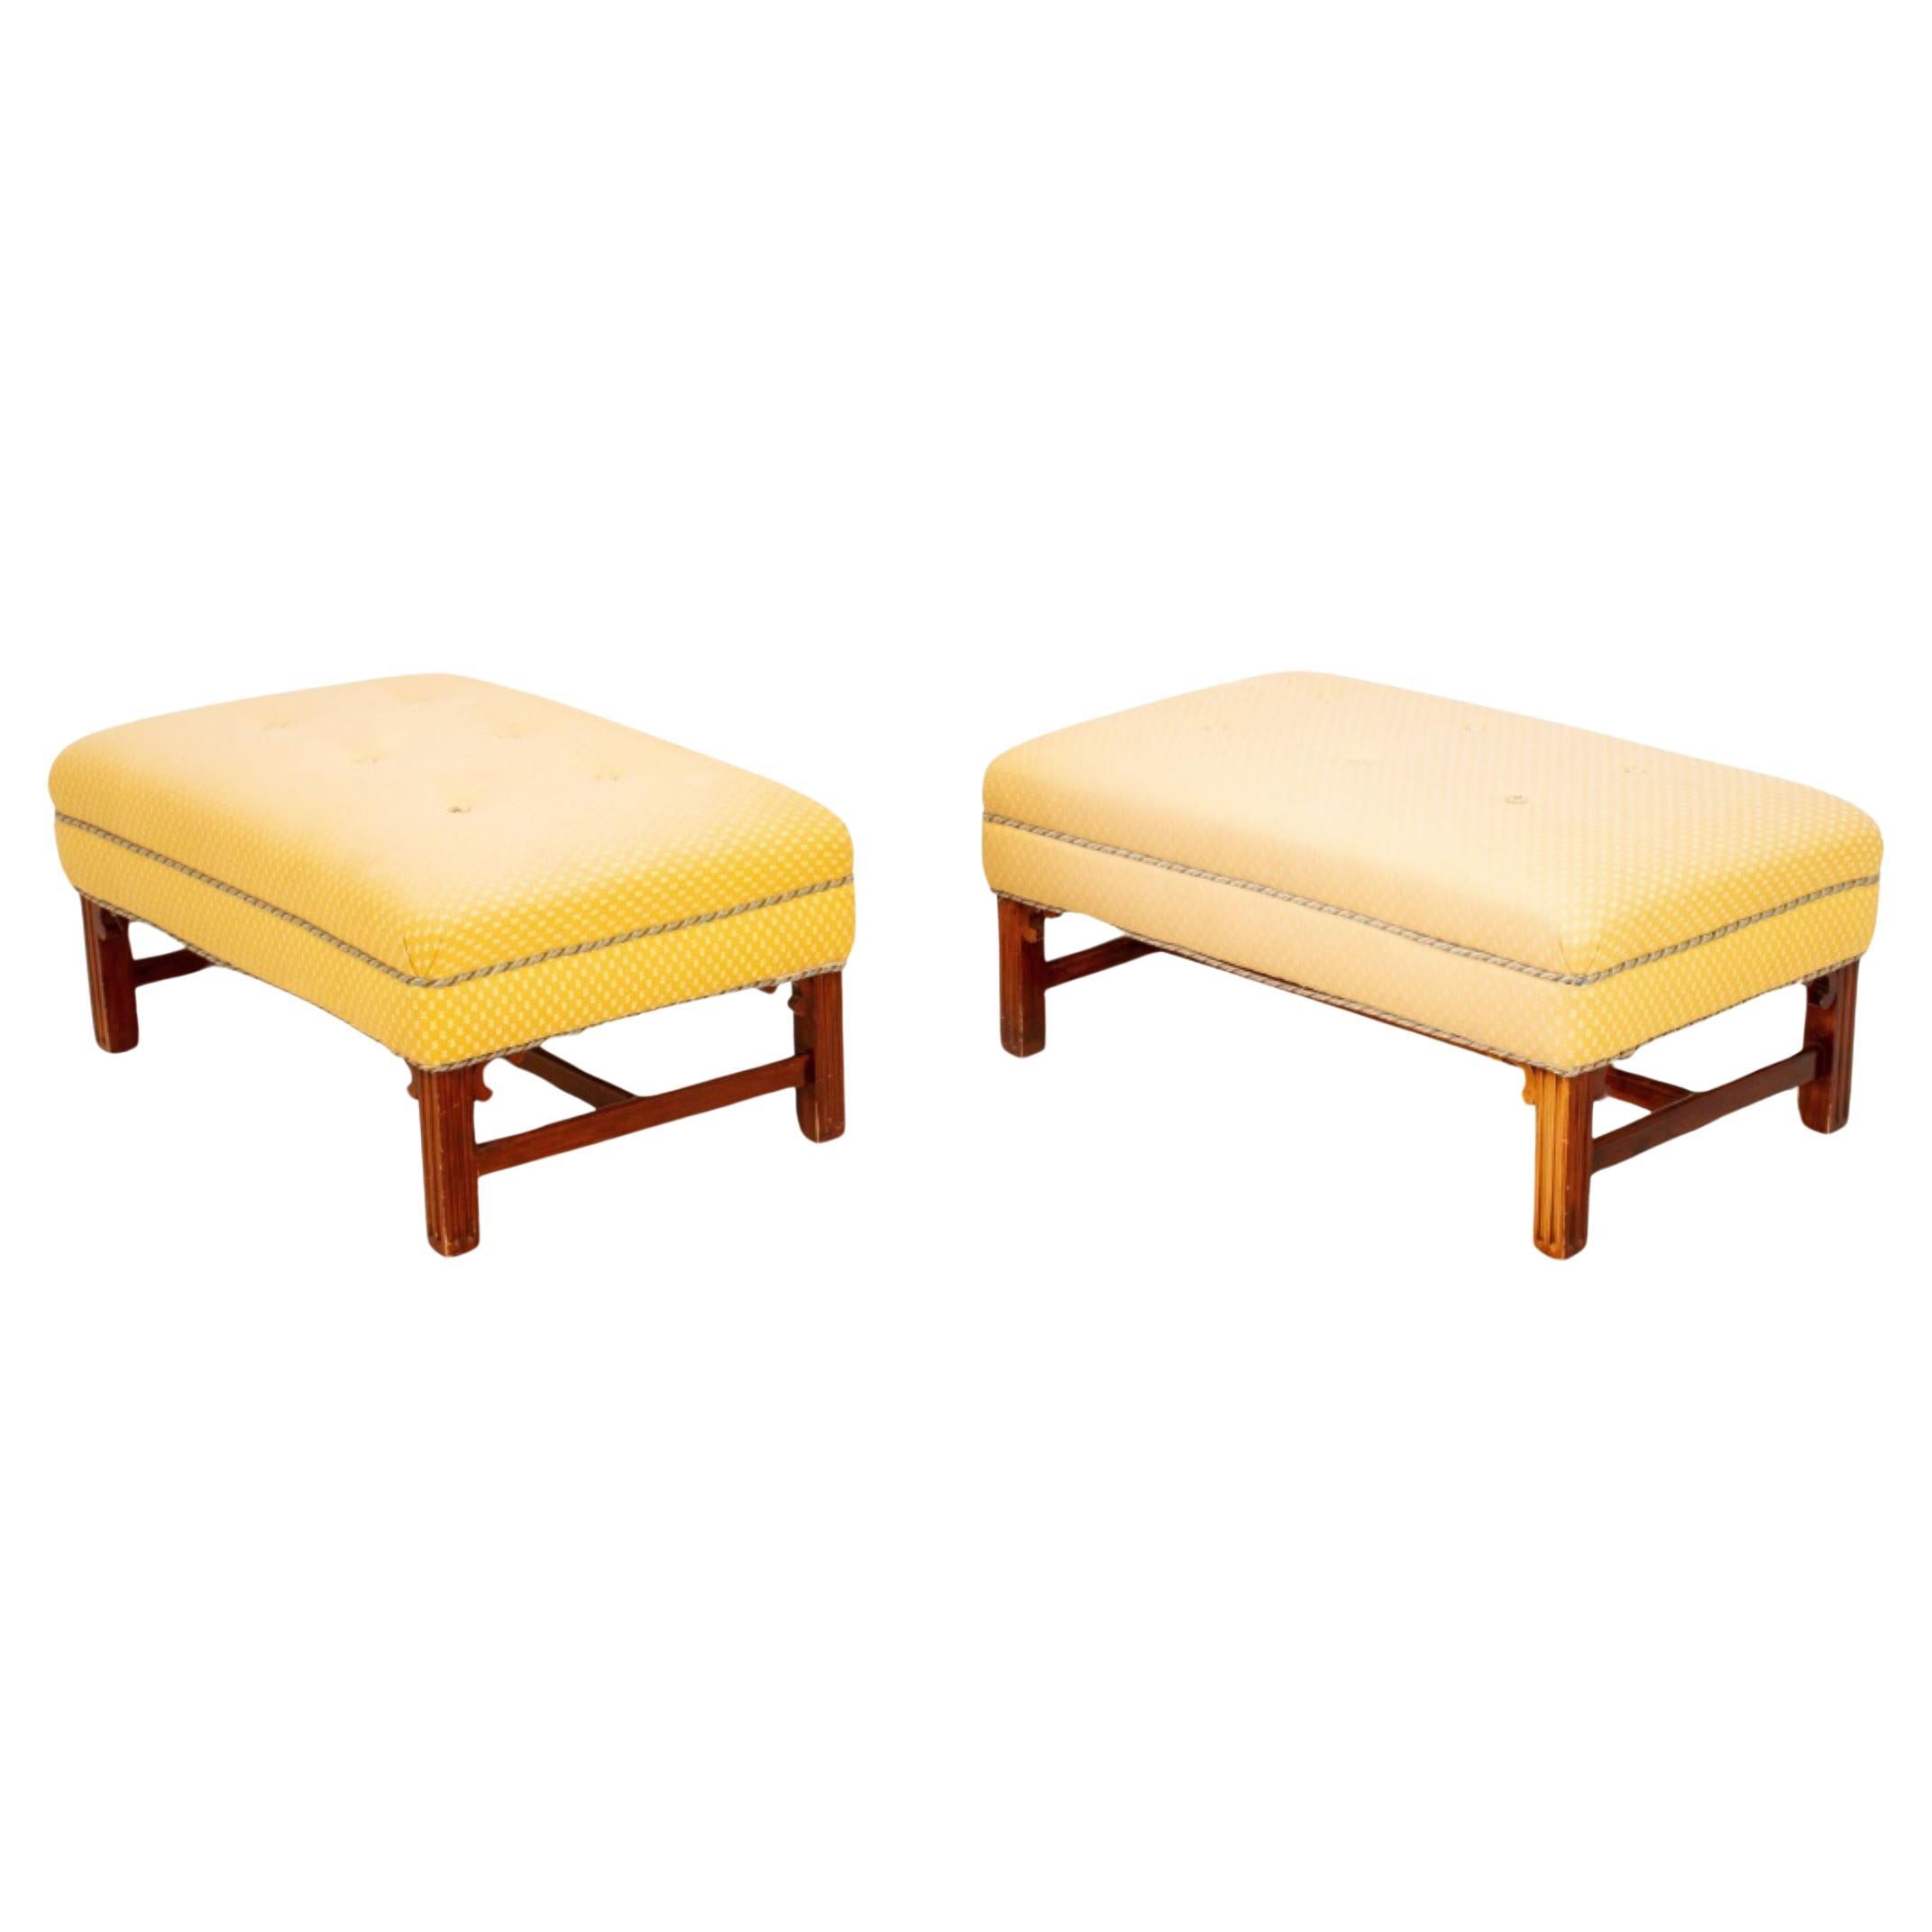 Chinese Chippendale Style Benches, Pair